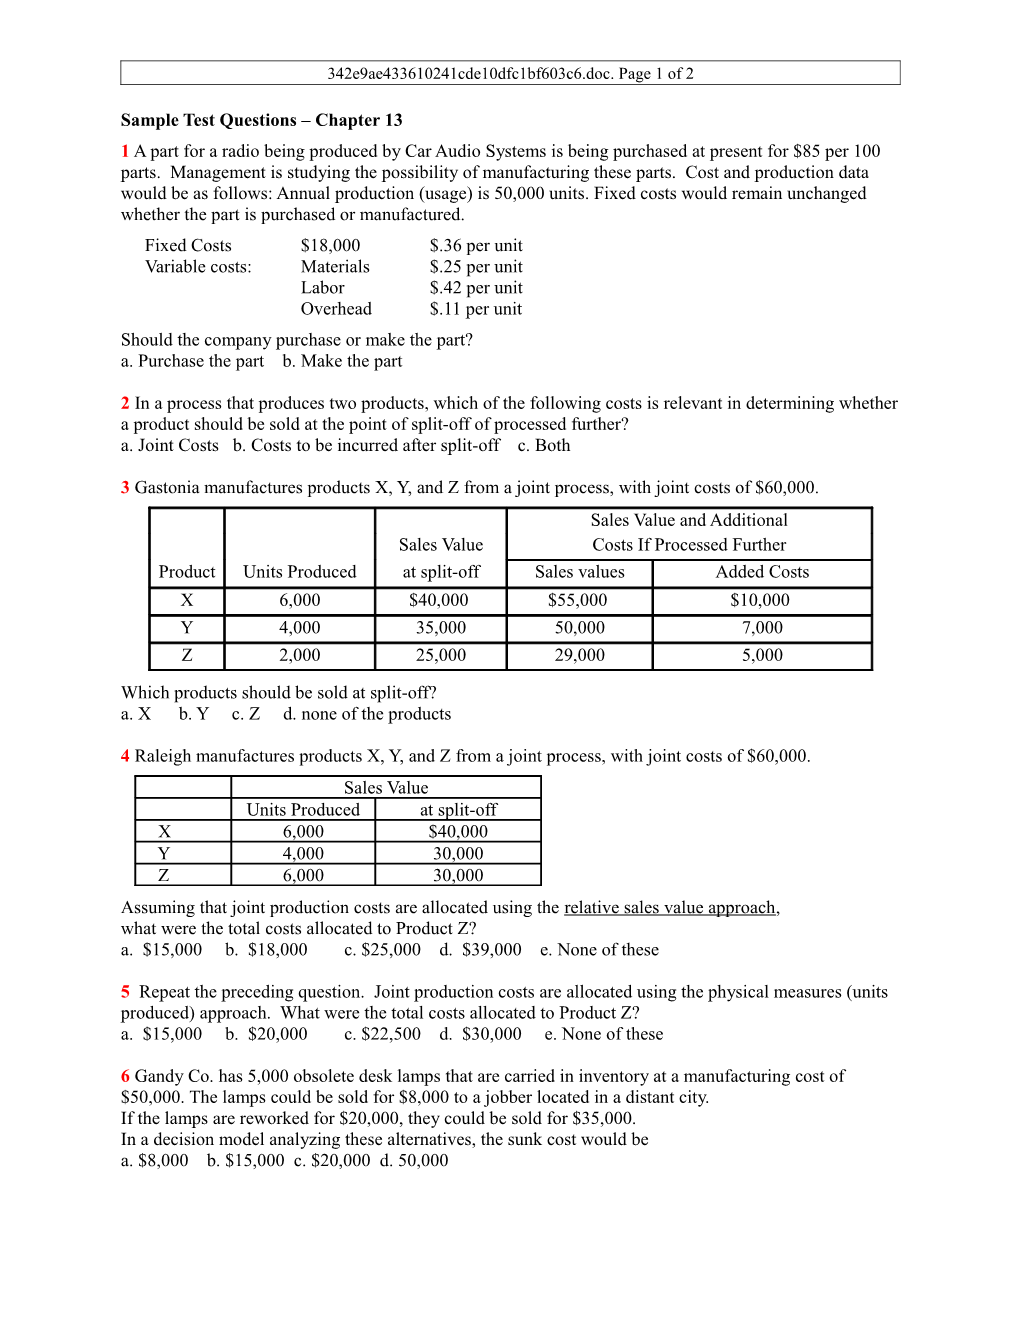 M11-Chp-13-3-Sample Test Questions. Page 1 of 1